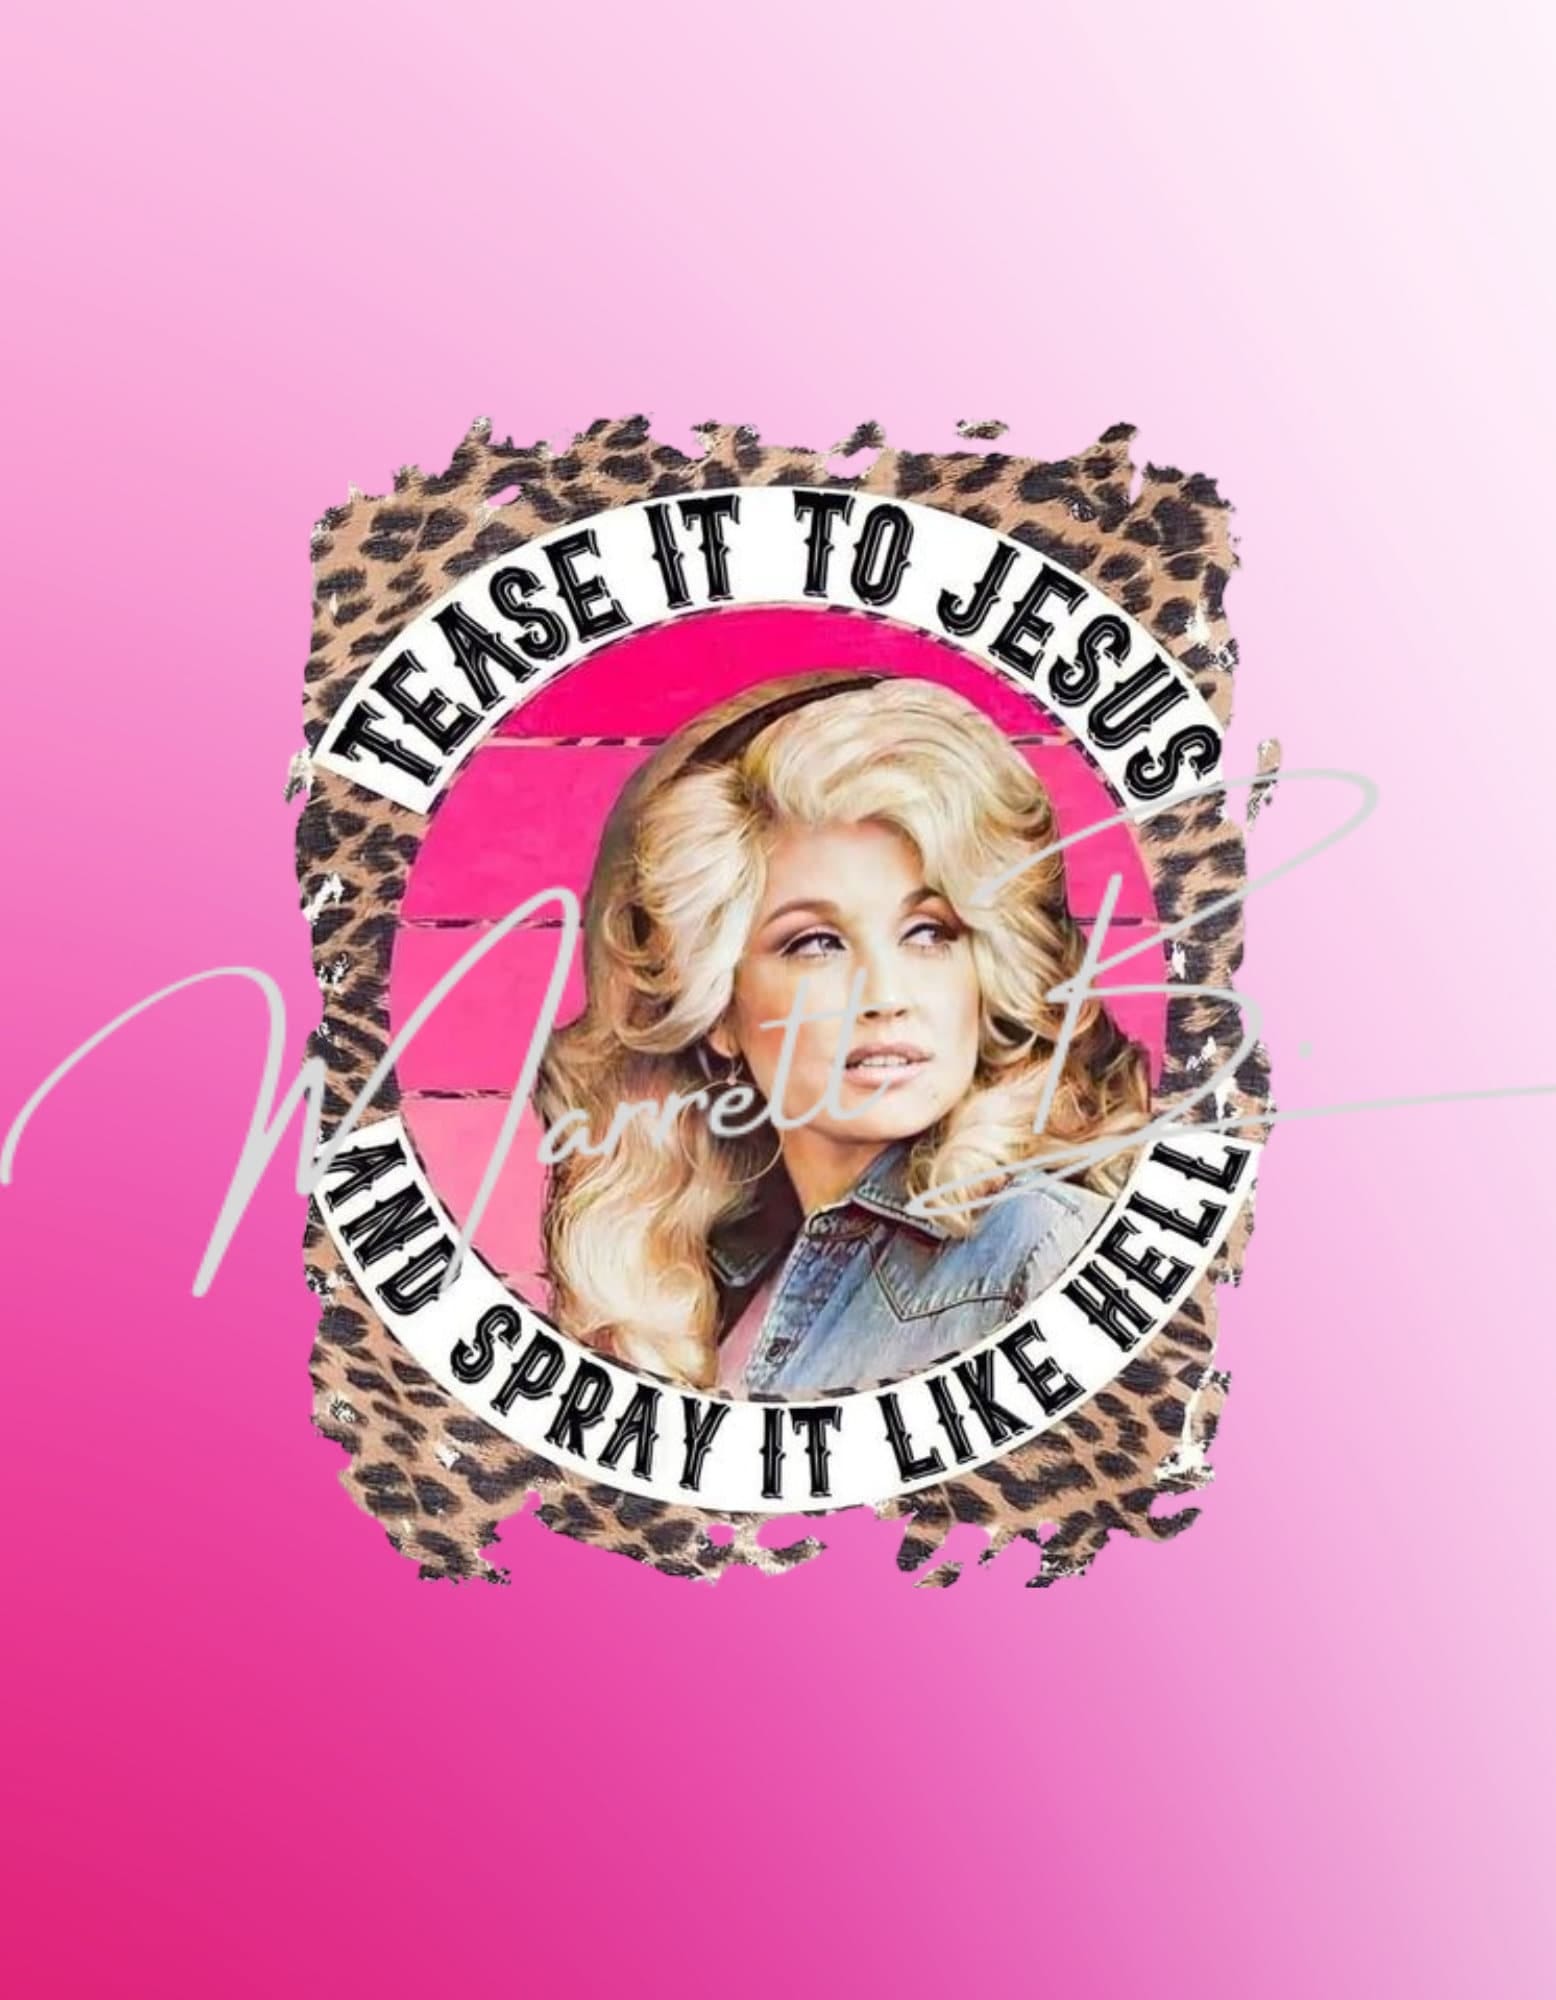 Tease it to Jesus and spray it like hell png, Dolly png, Dolly Parton png, retro dolly parton, retro dolly png, wwdd png, dolly